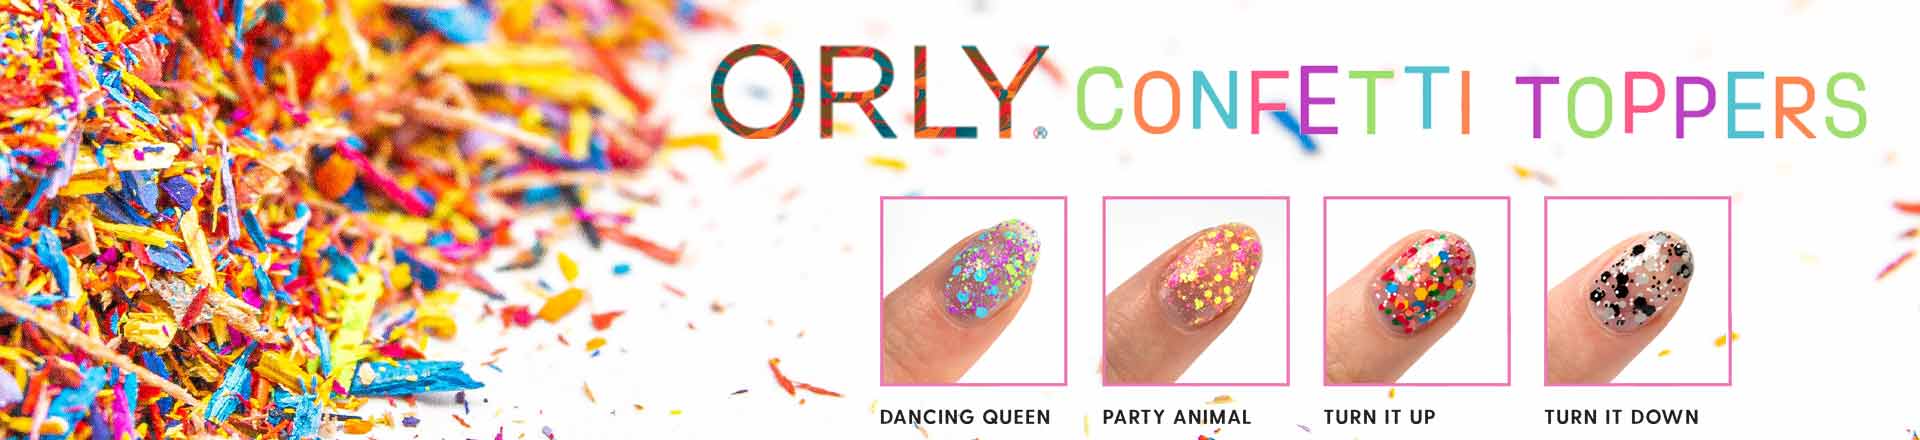 ORLY CONFETTI TOPPERS